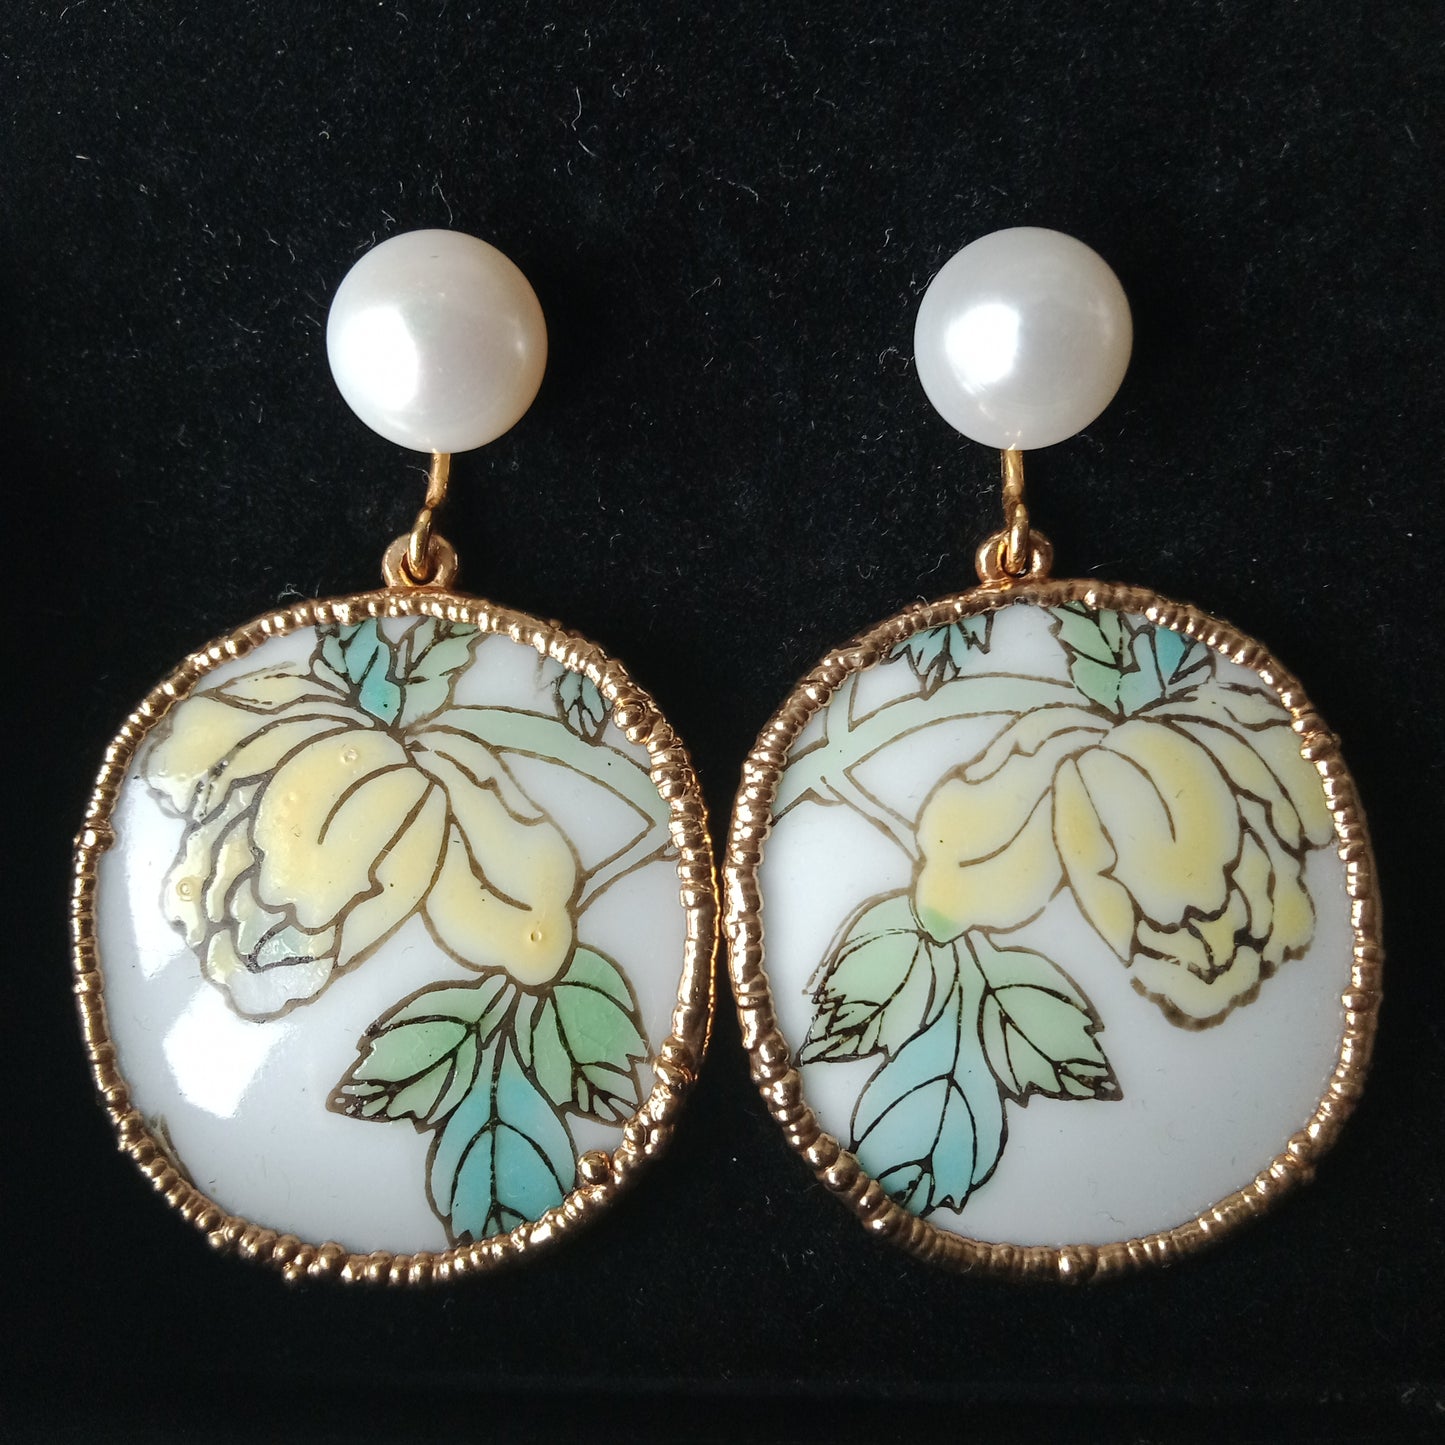 Yellow flower porcelain and FW pearl earrings